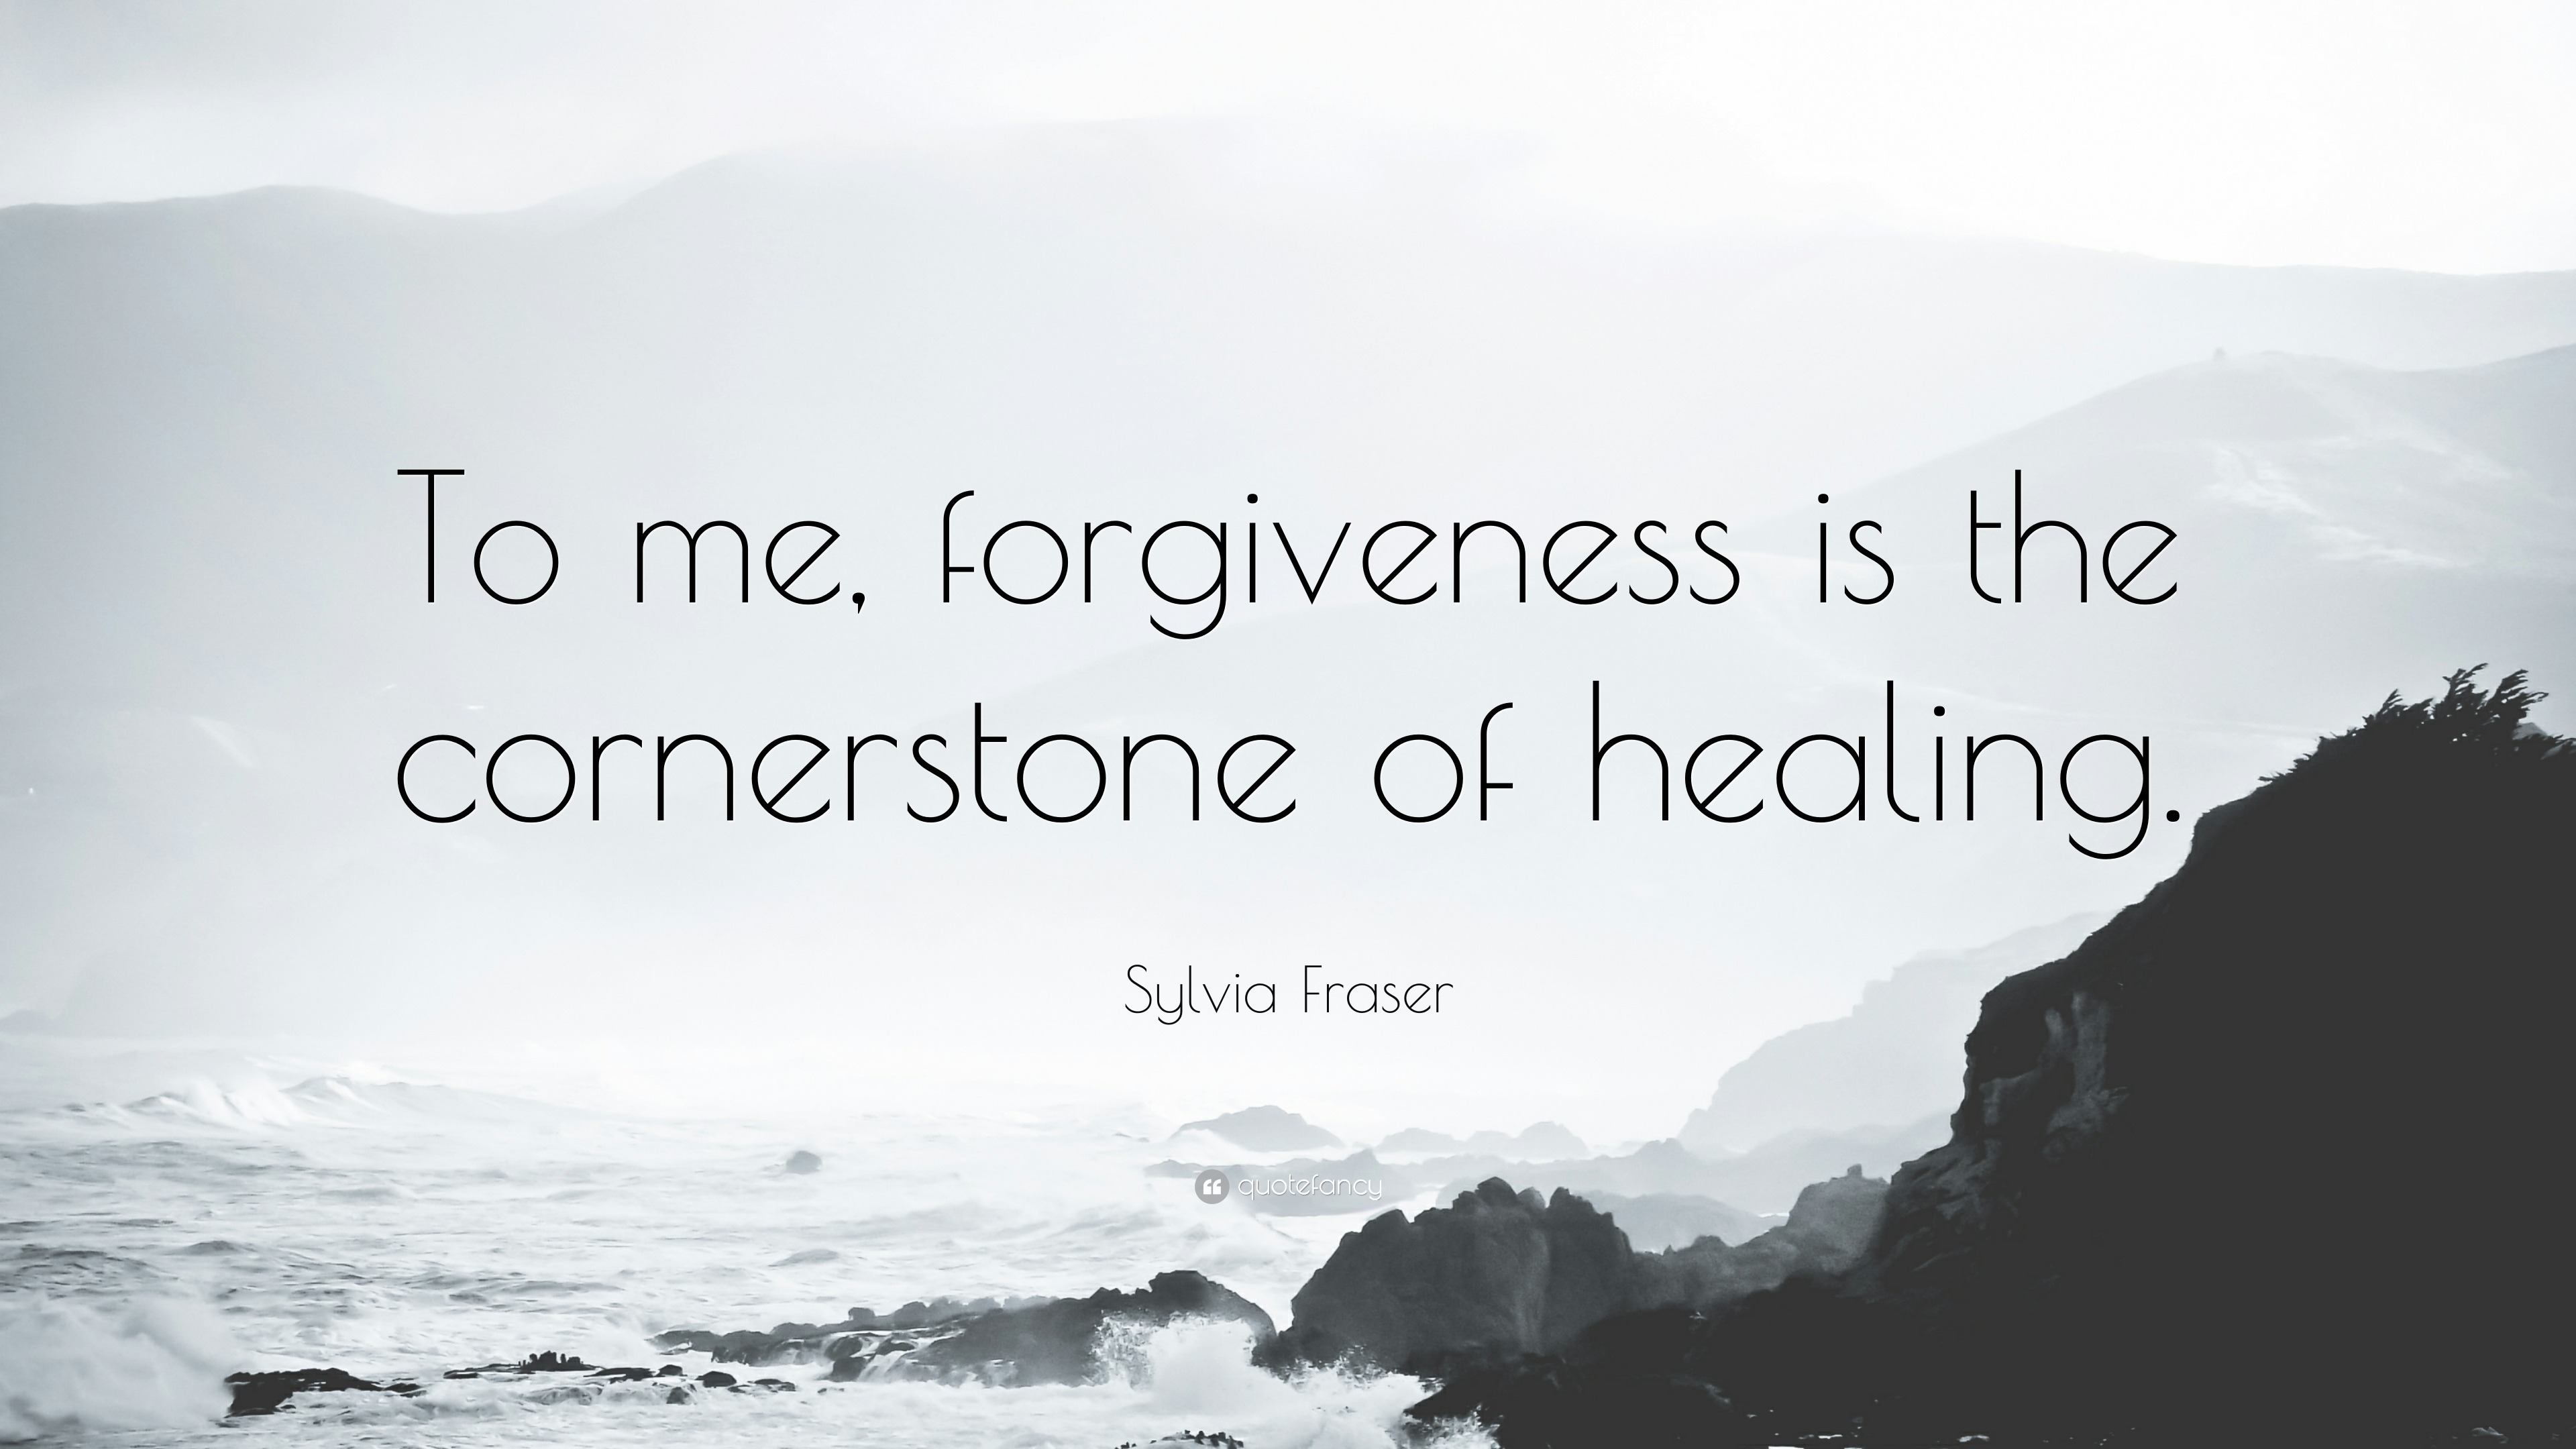 Sylvia Fraser Quote: “To me